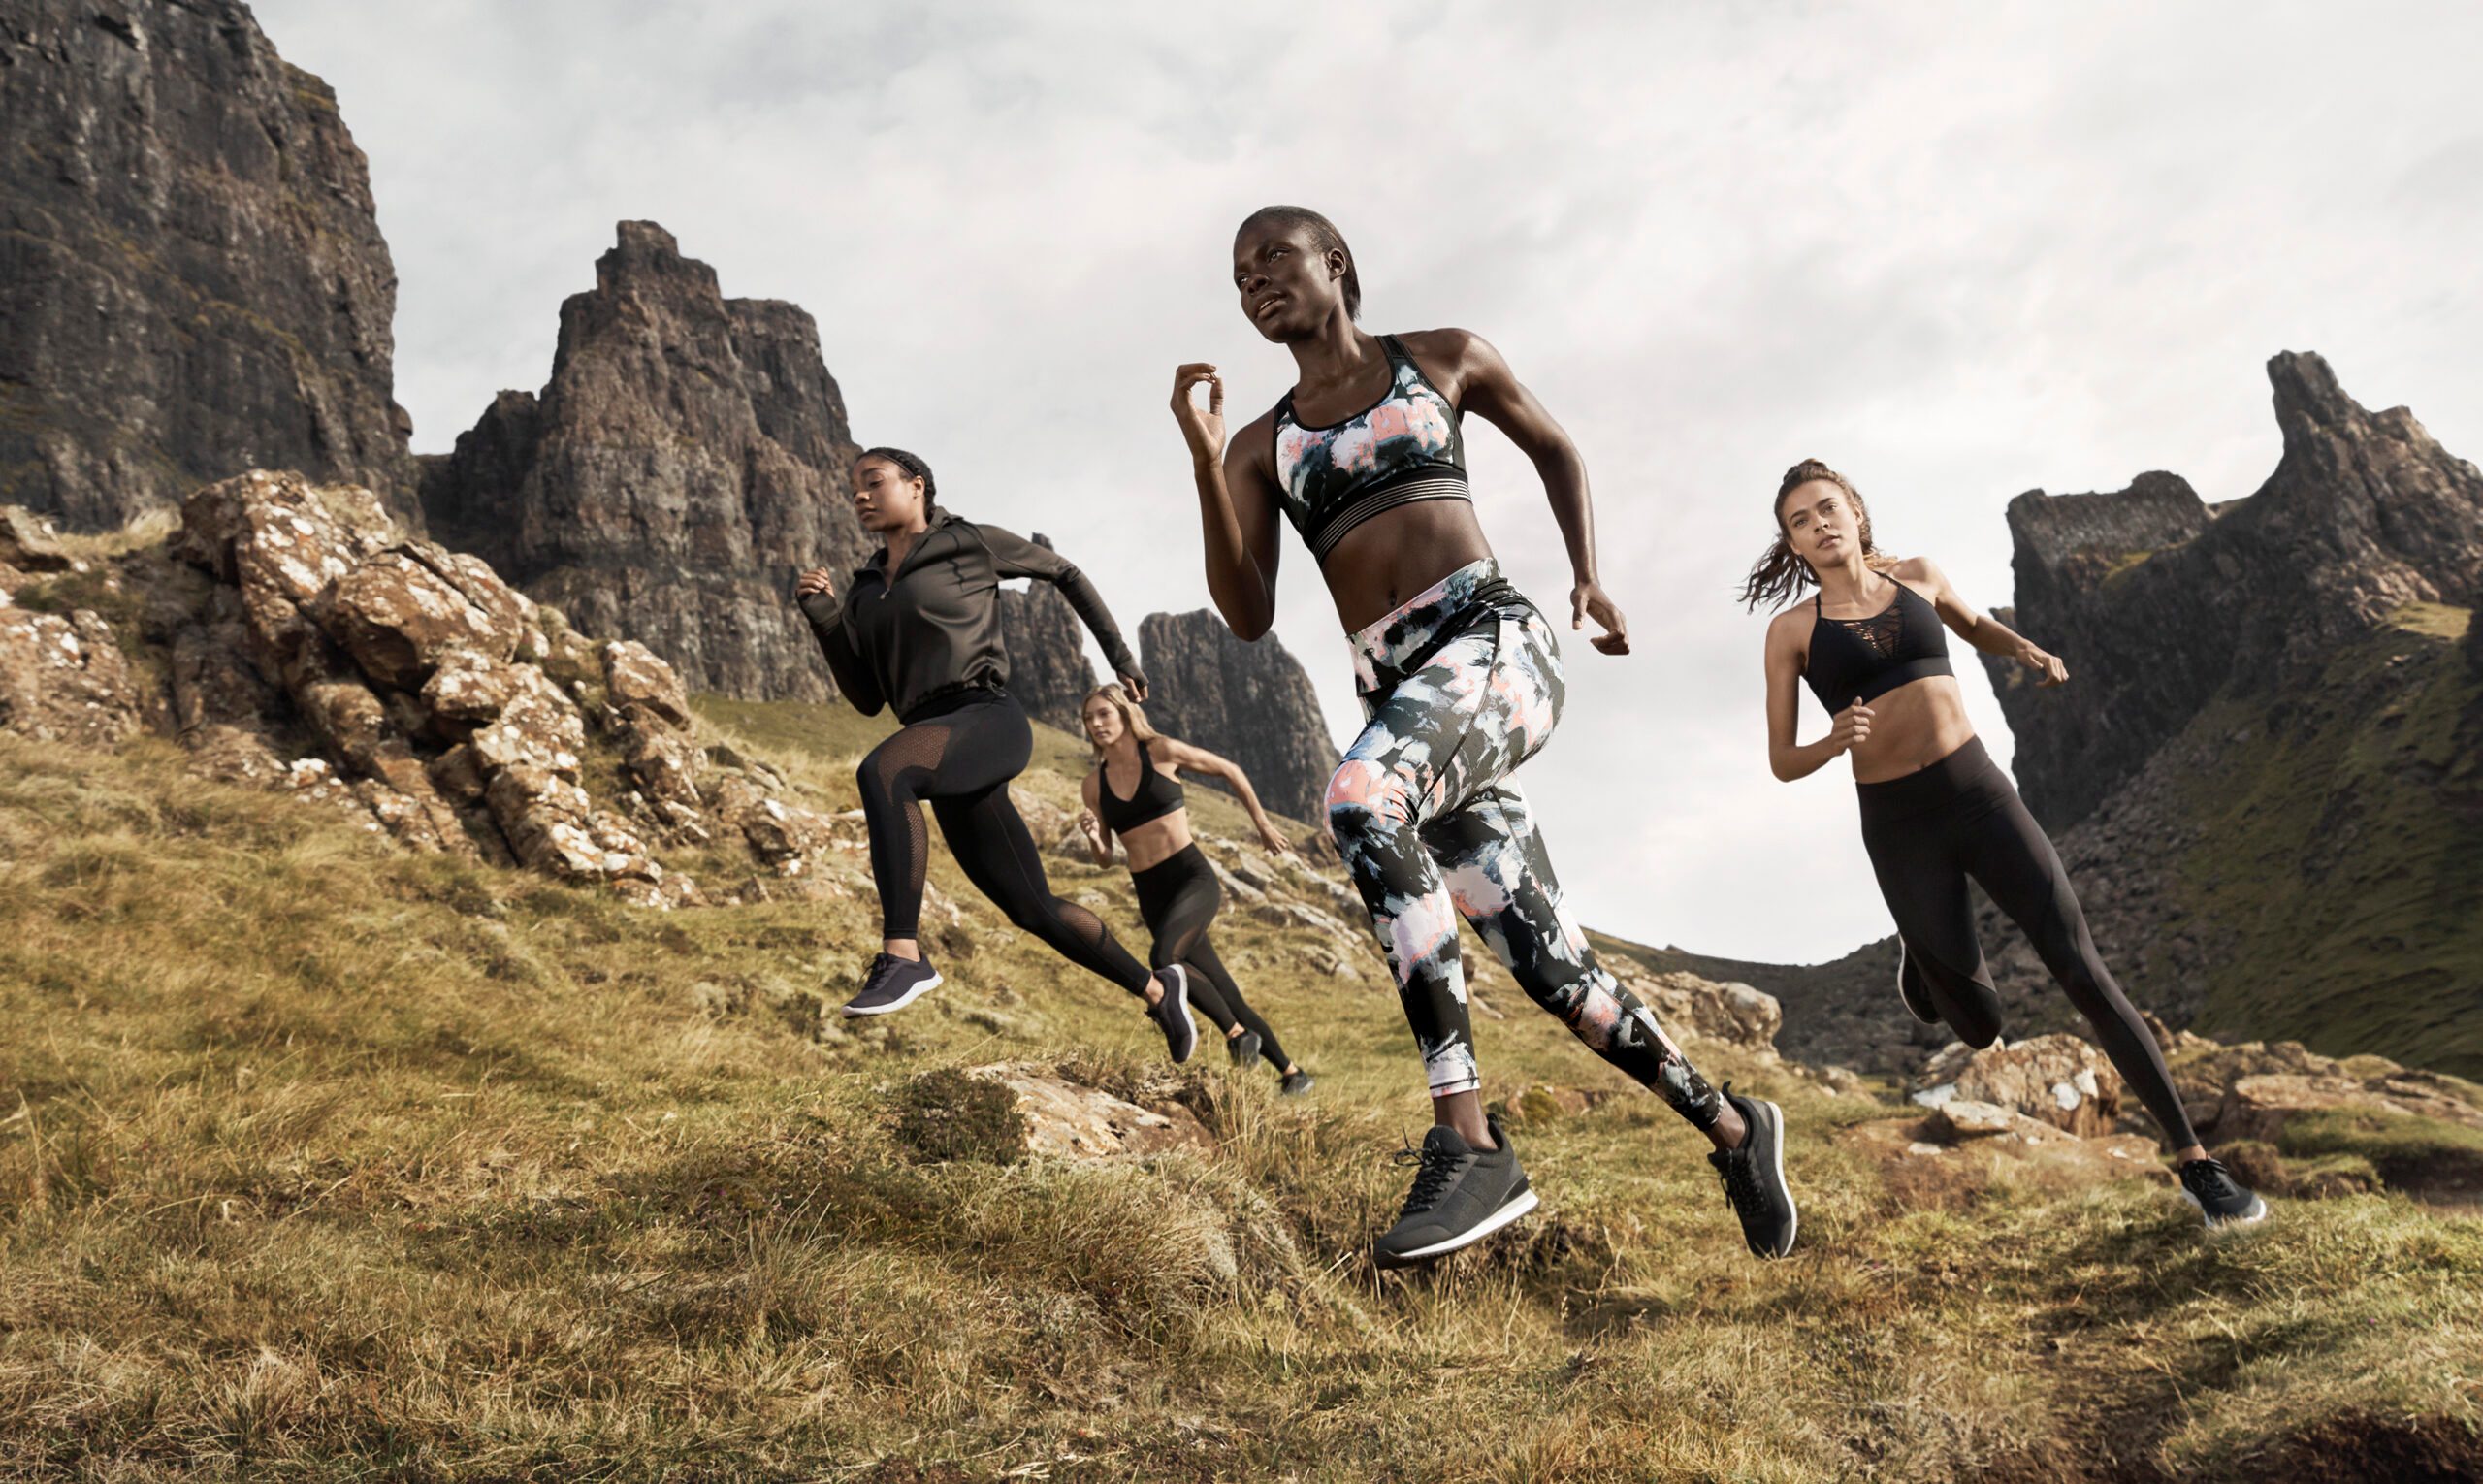 IN PHOTOS: H&M’s stylish, eco-friendly sport collection is out!